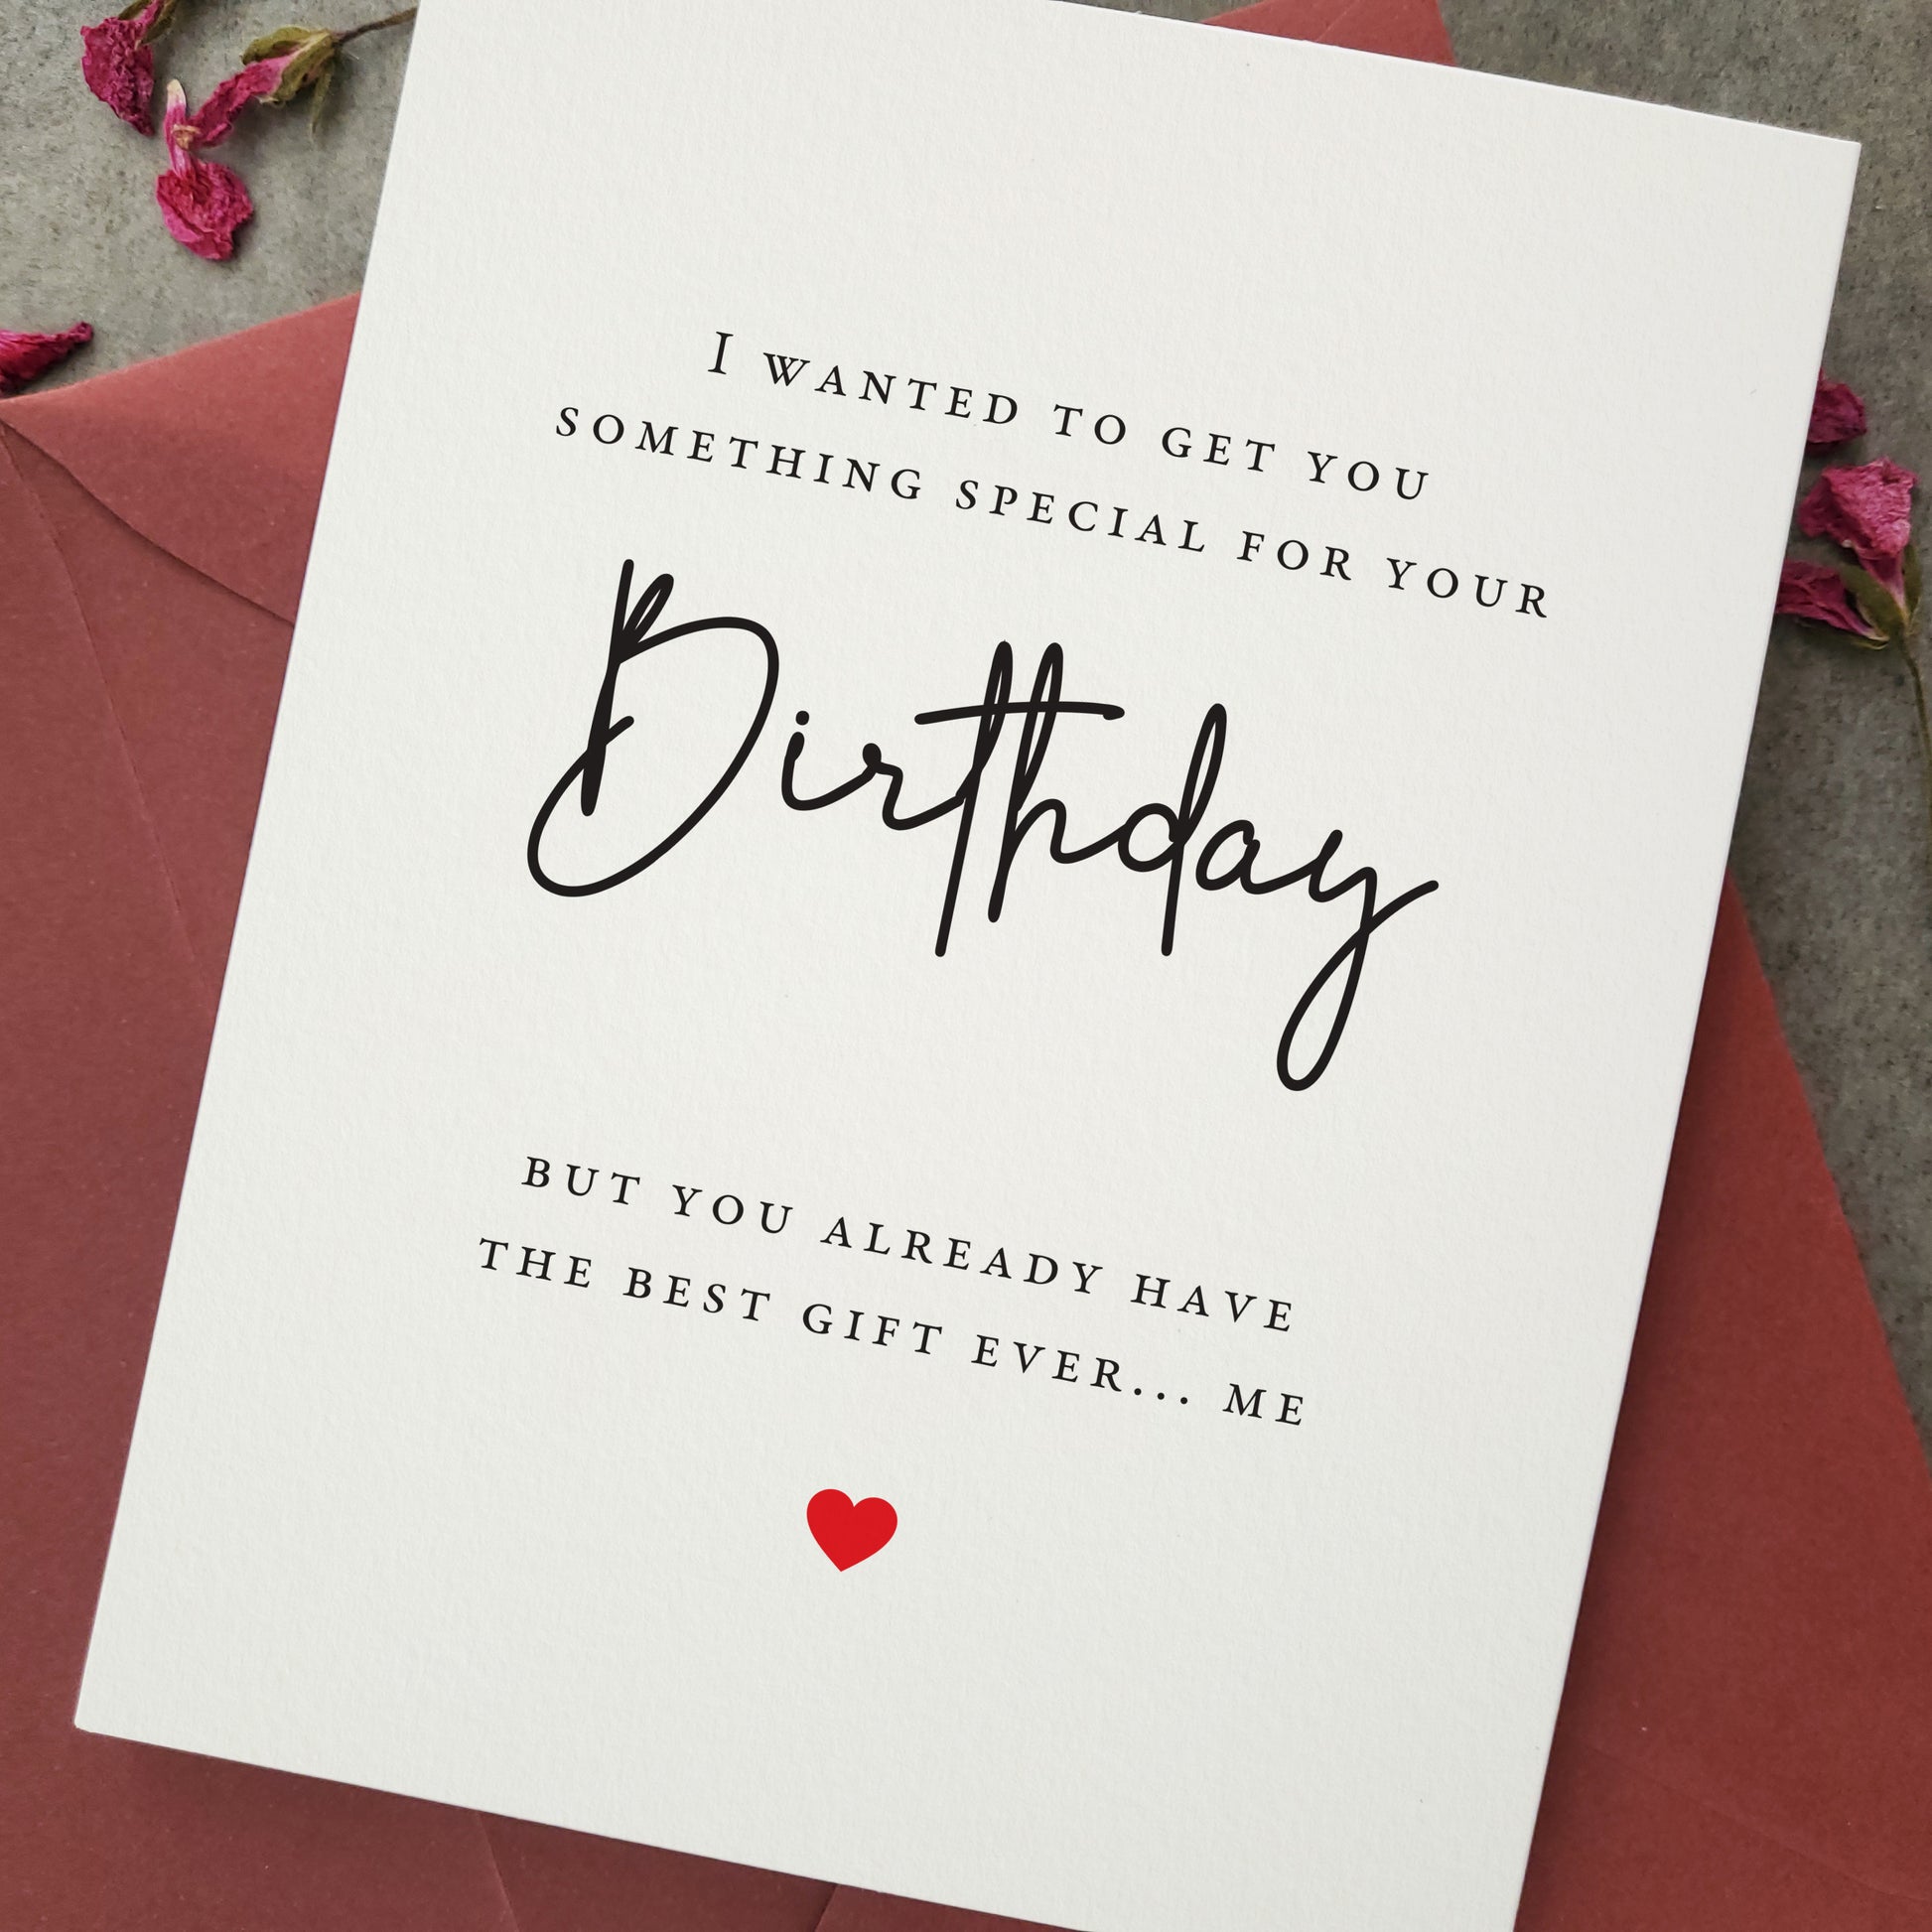 I wanted to get you something special but you already have me  birthday card - XOXOKristen